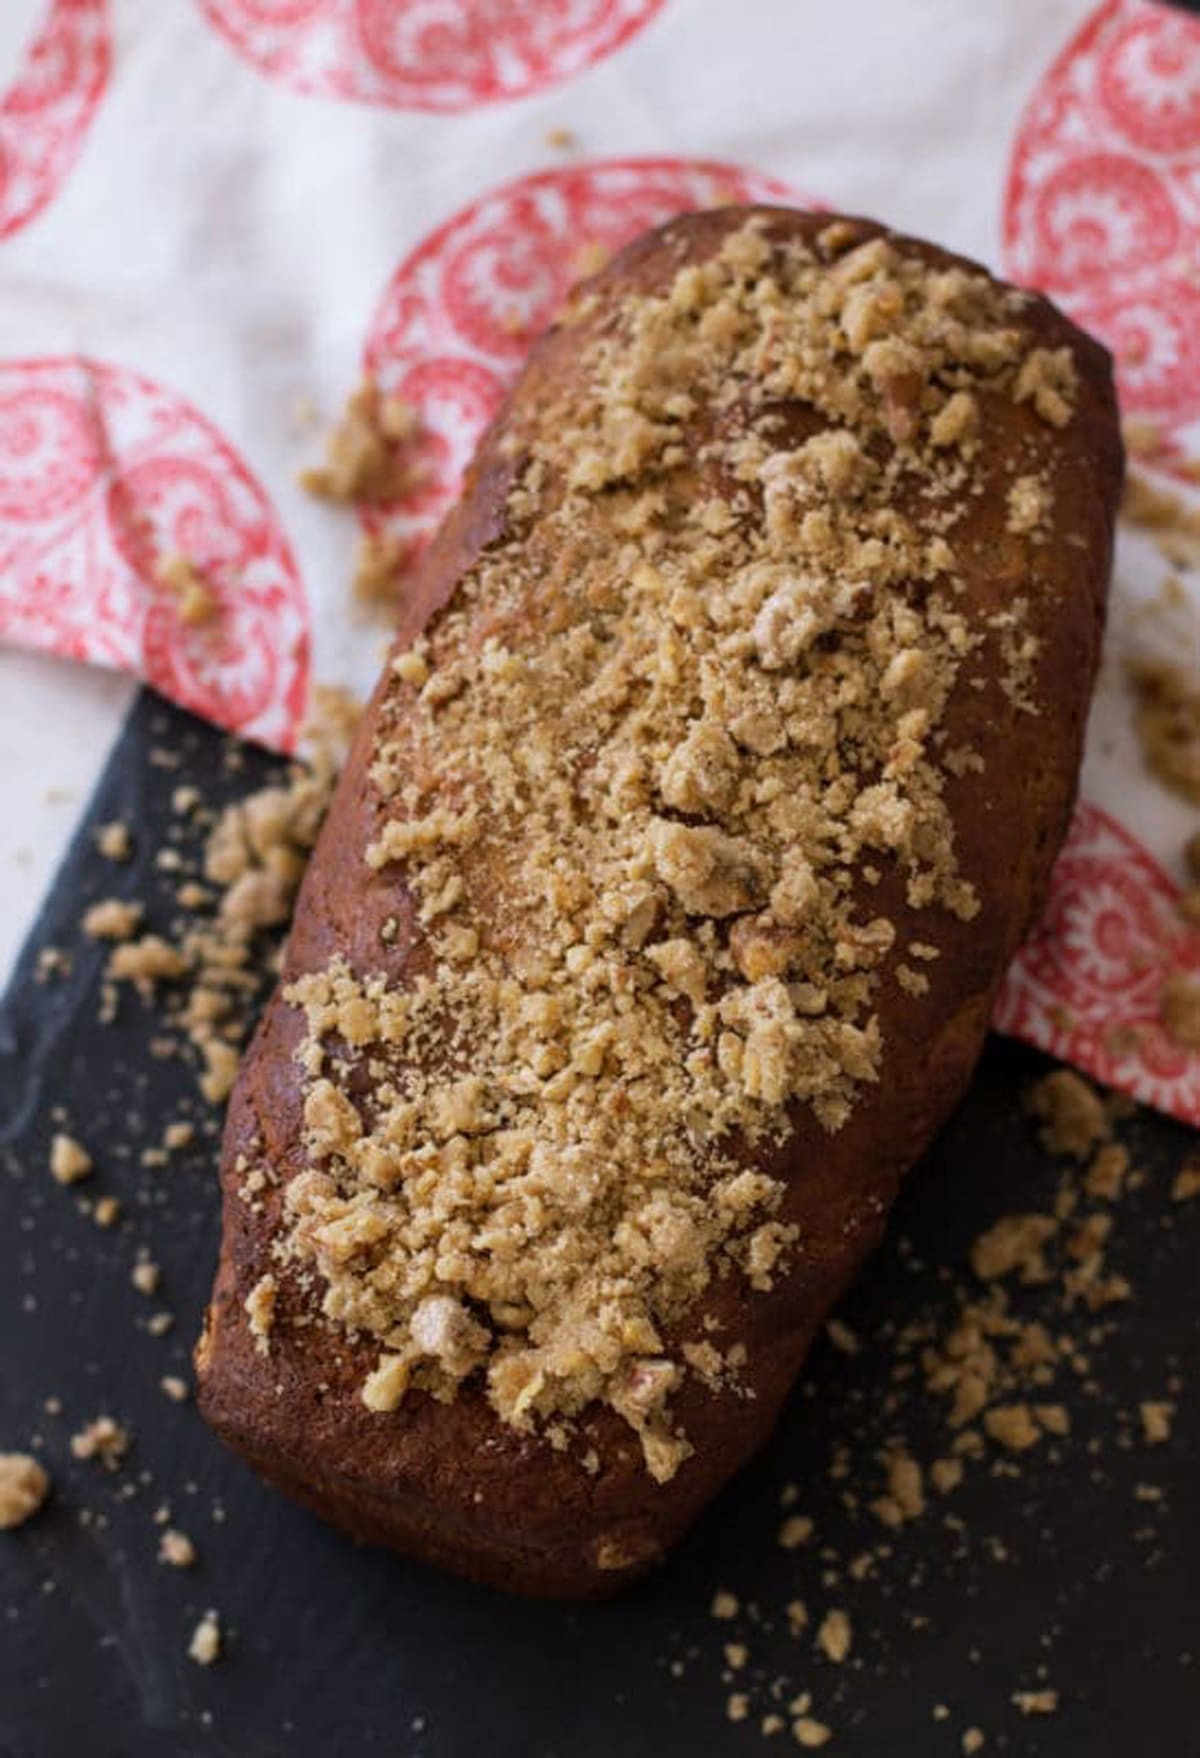 Loaf of Banana Bread with Streusel-Nut Topping sitting on a black cutting board.